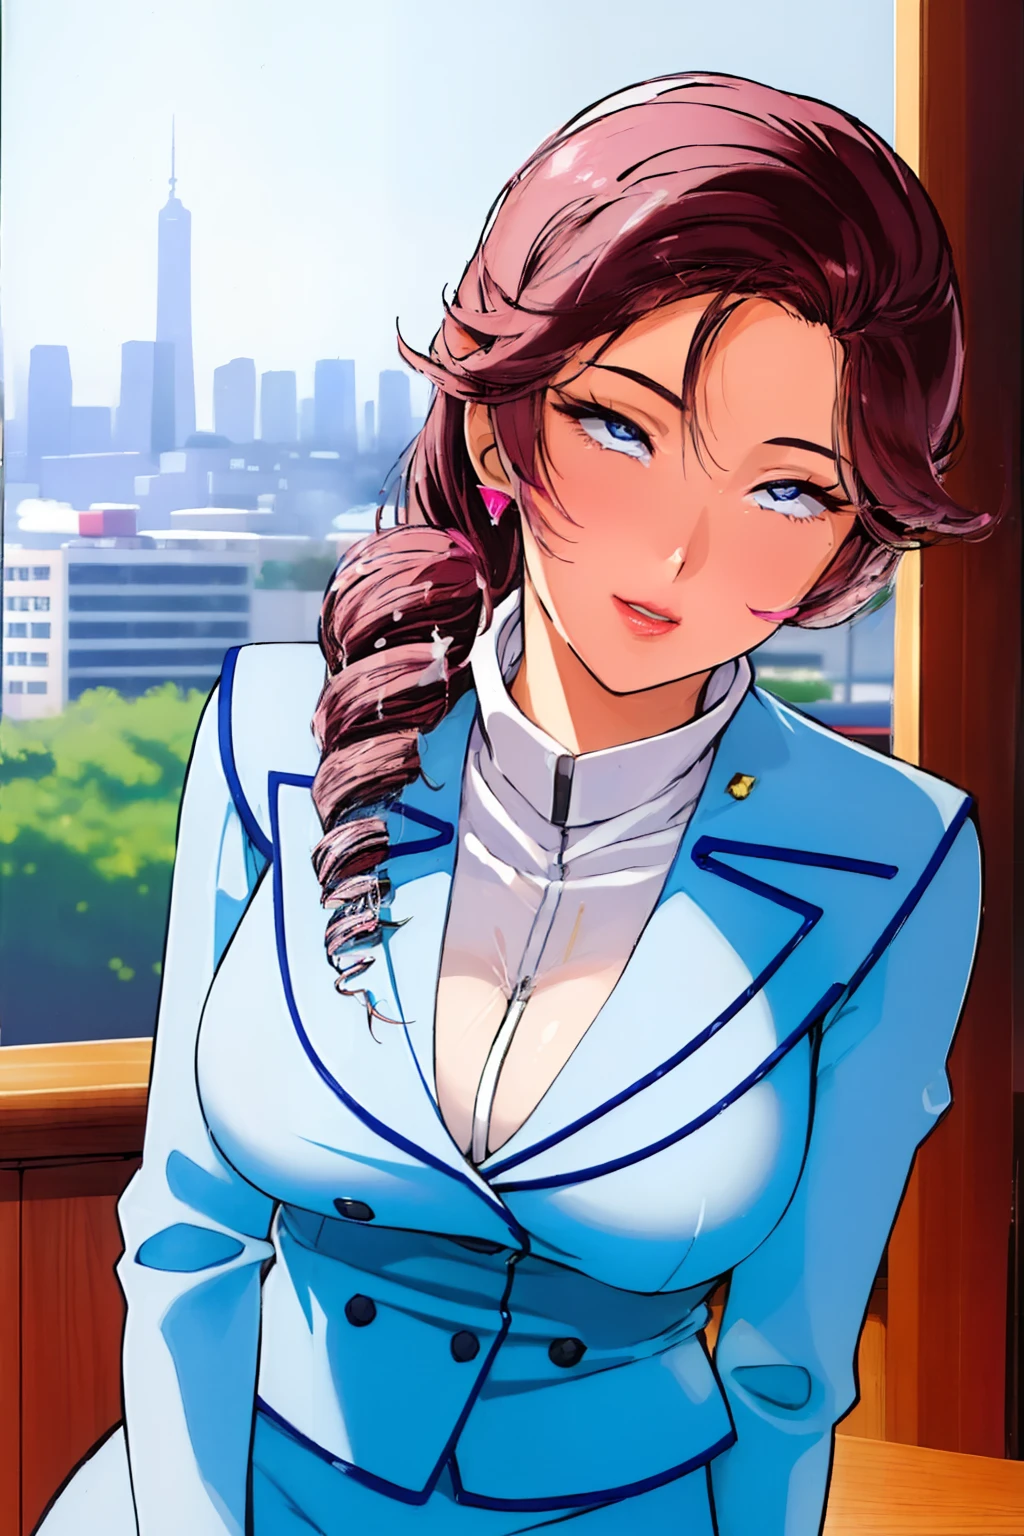 (natta:1.7), jpn, TOKYOcty, CityView, In front of the window,
Call attention、
Blue suit、pencil skirts、White collar、makeup、long-sleeve、
pink earring、jewely、lipsticks、
blue eyess、drill hair、brown haired、a closed mouth、single braid、
1 girl in、24 year old、a matural female、Beautiful Finger、beautiful long leg、Beautiful body、Beautiful Nose、Beautiful character design、perfect  eyes、face perfect、
looking at viewerer、In the center of the image、
NSFW、Official Art、the Extremely Detailed CG Unity 8K Wallpapers、Perfect litthing、colourfull、Bright_Front_face_Lighting、
(​masterpiece:1.0)、(best_quality:1.0)、超A high resolution、4K、The ultra-detailliert、
photo shot、8K、HDR、hight resolution、absurderes:1.2、Kodak portra 400、film grains、blurry backround、bokeh dof:1.2、lensflare、(vibrant_color:1.2)
(Beautiful fece,large_Breasts:1.4), (beautiful_face:1.5),(narrow_waist),red blush:1.3、covered in cum